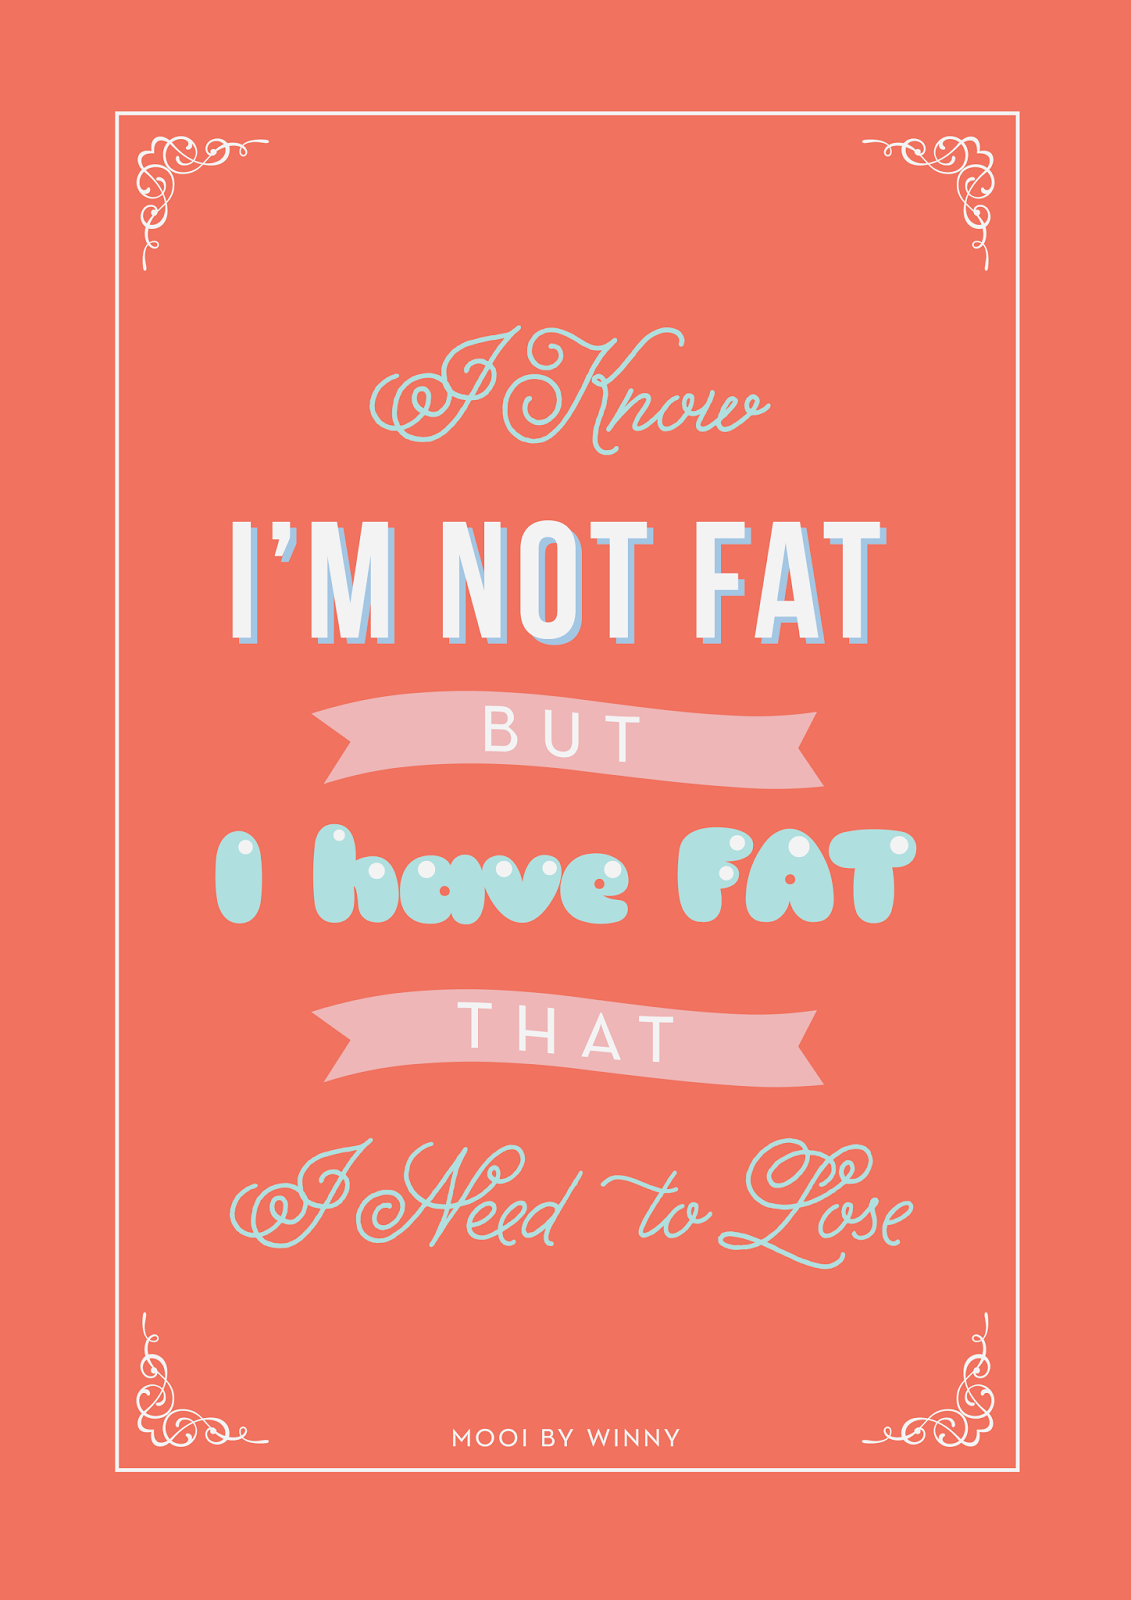 I Need To Lose Fat 10